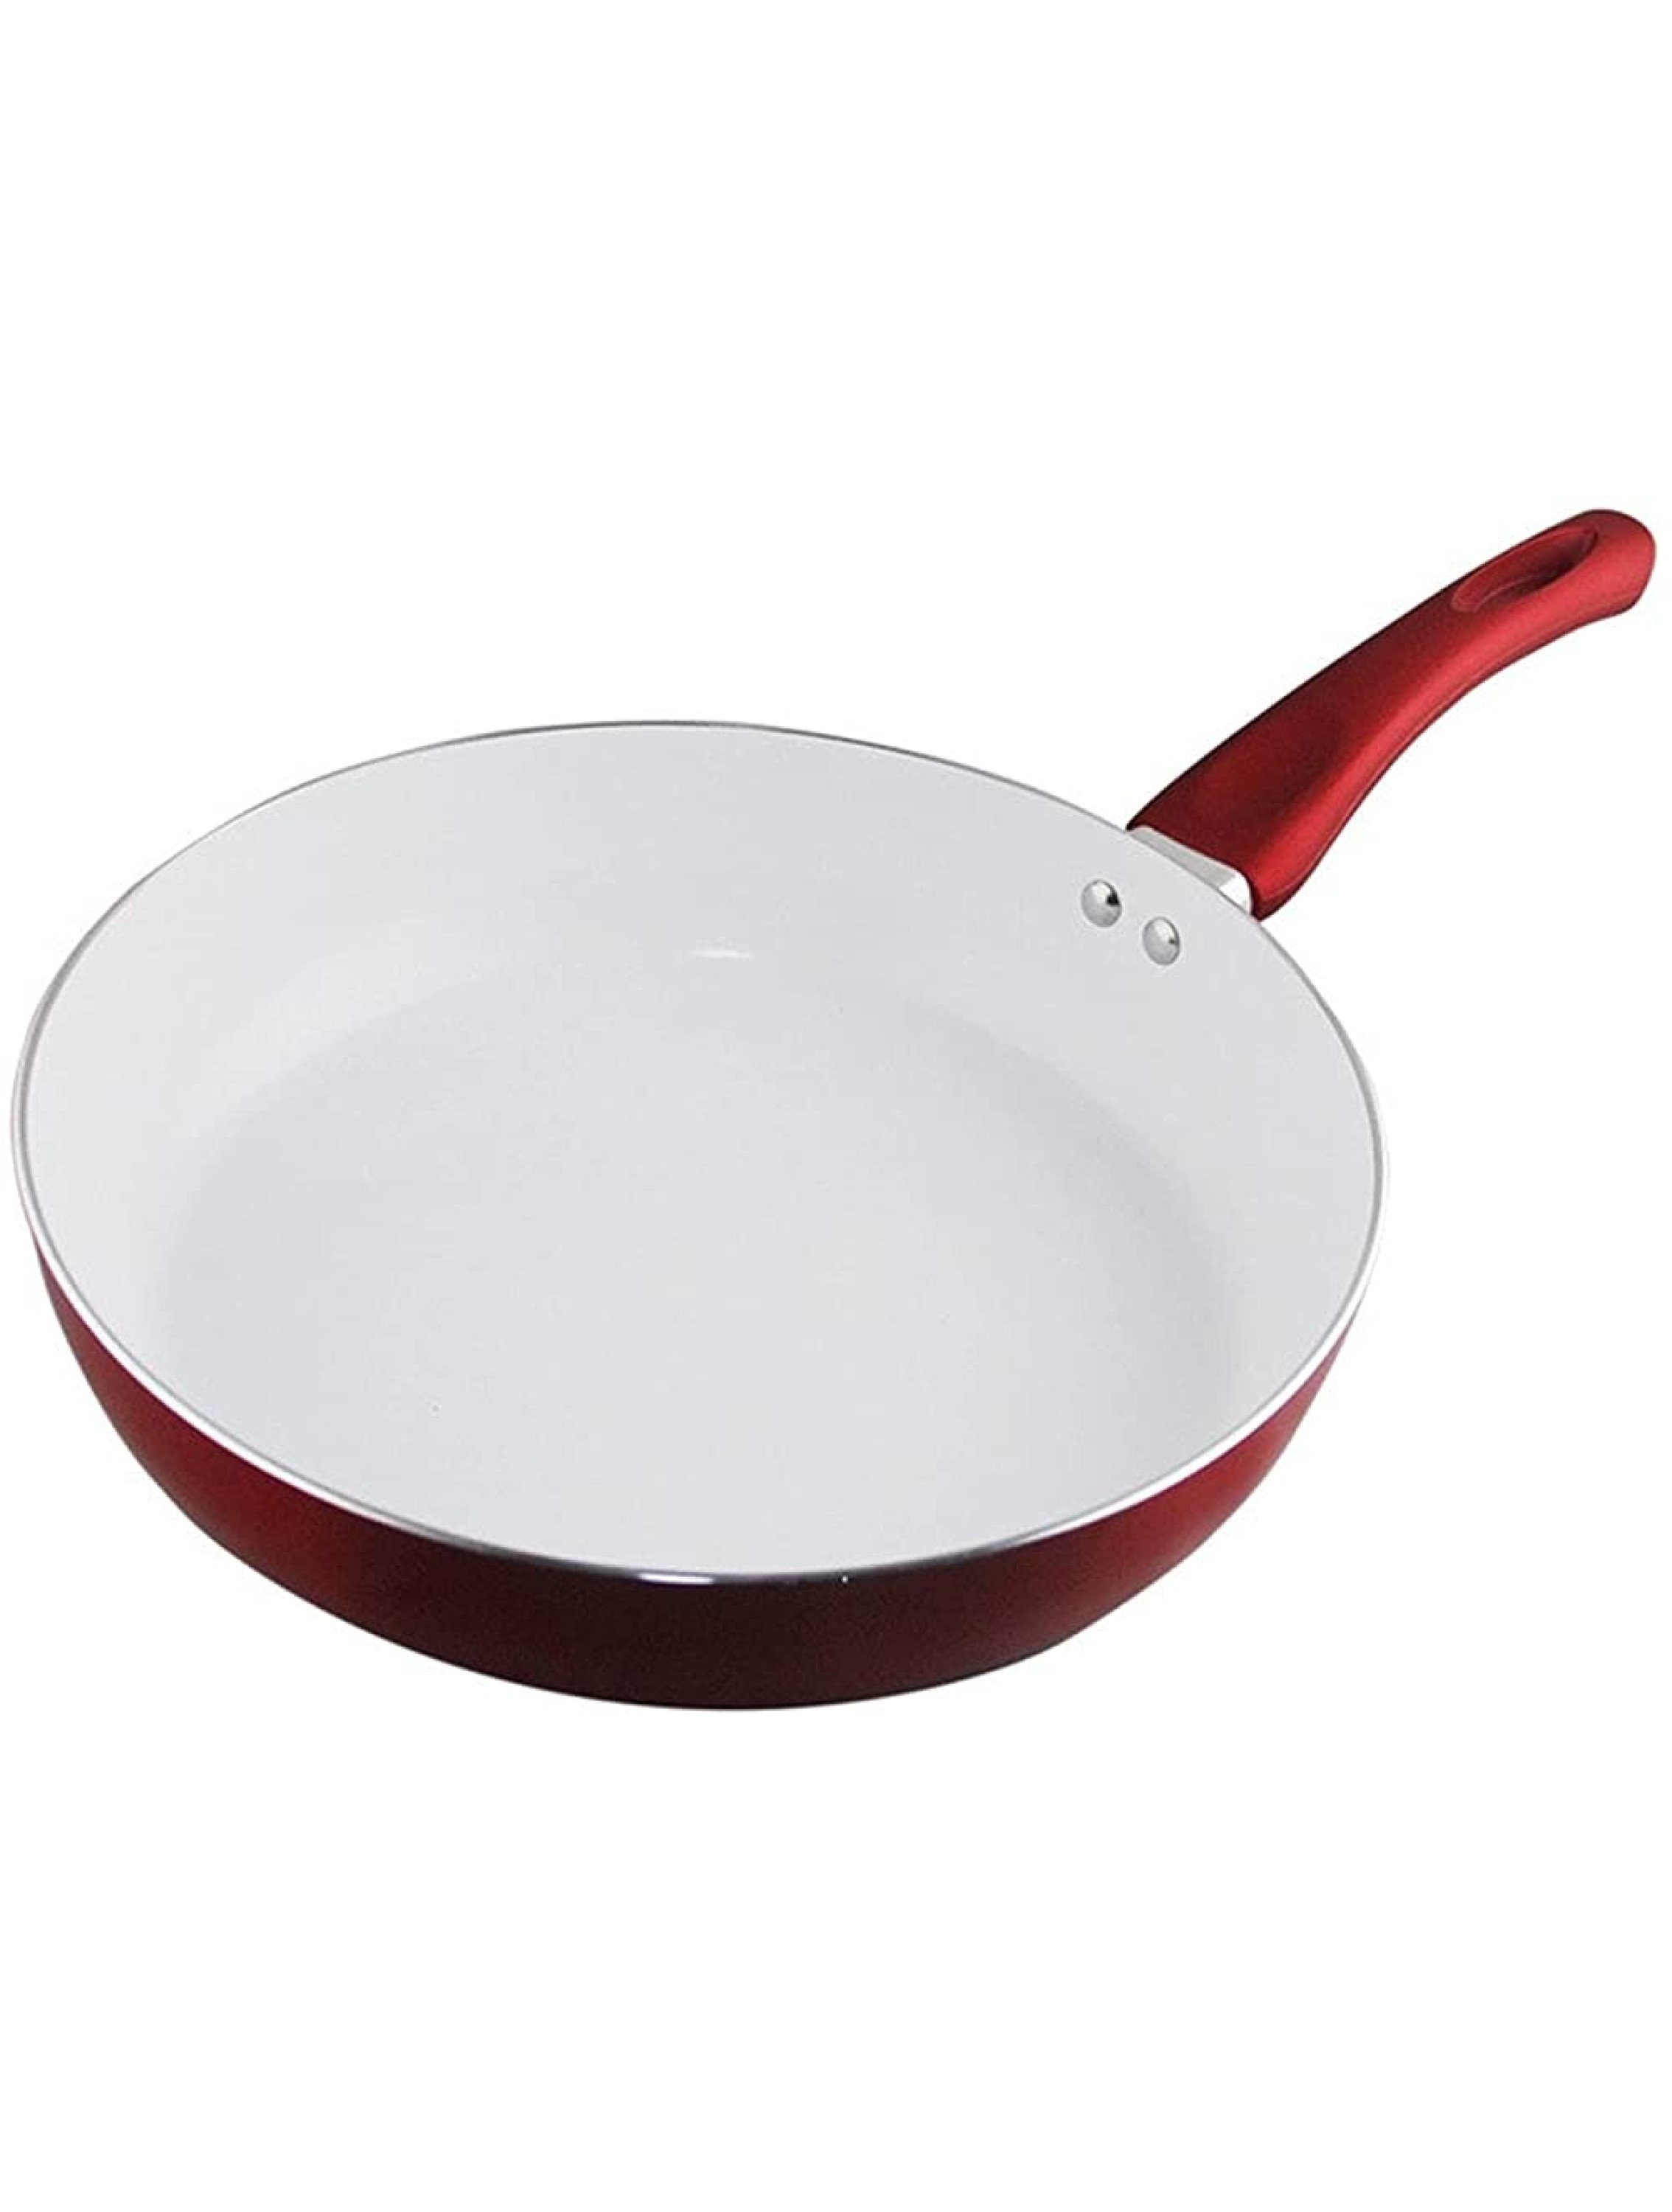 SHUOG Non-stick Copper Frying Pan With Nanoscale Ceramic Coating And Induction Cooking,Oven & Dishwasher Safe Panela De Ceramica Pot Chef's Pans Color : Red Sheet Size : 26cm - BT4N0ZGCG